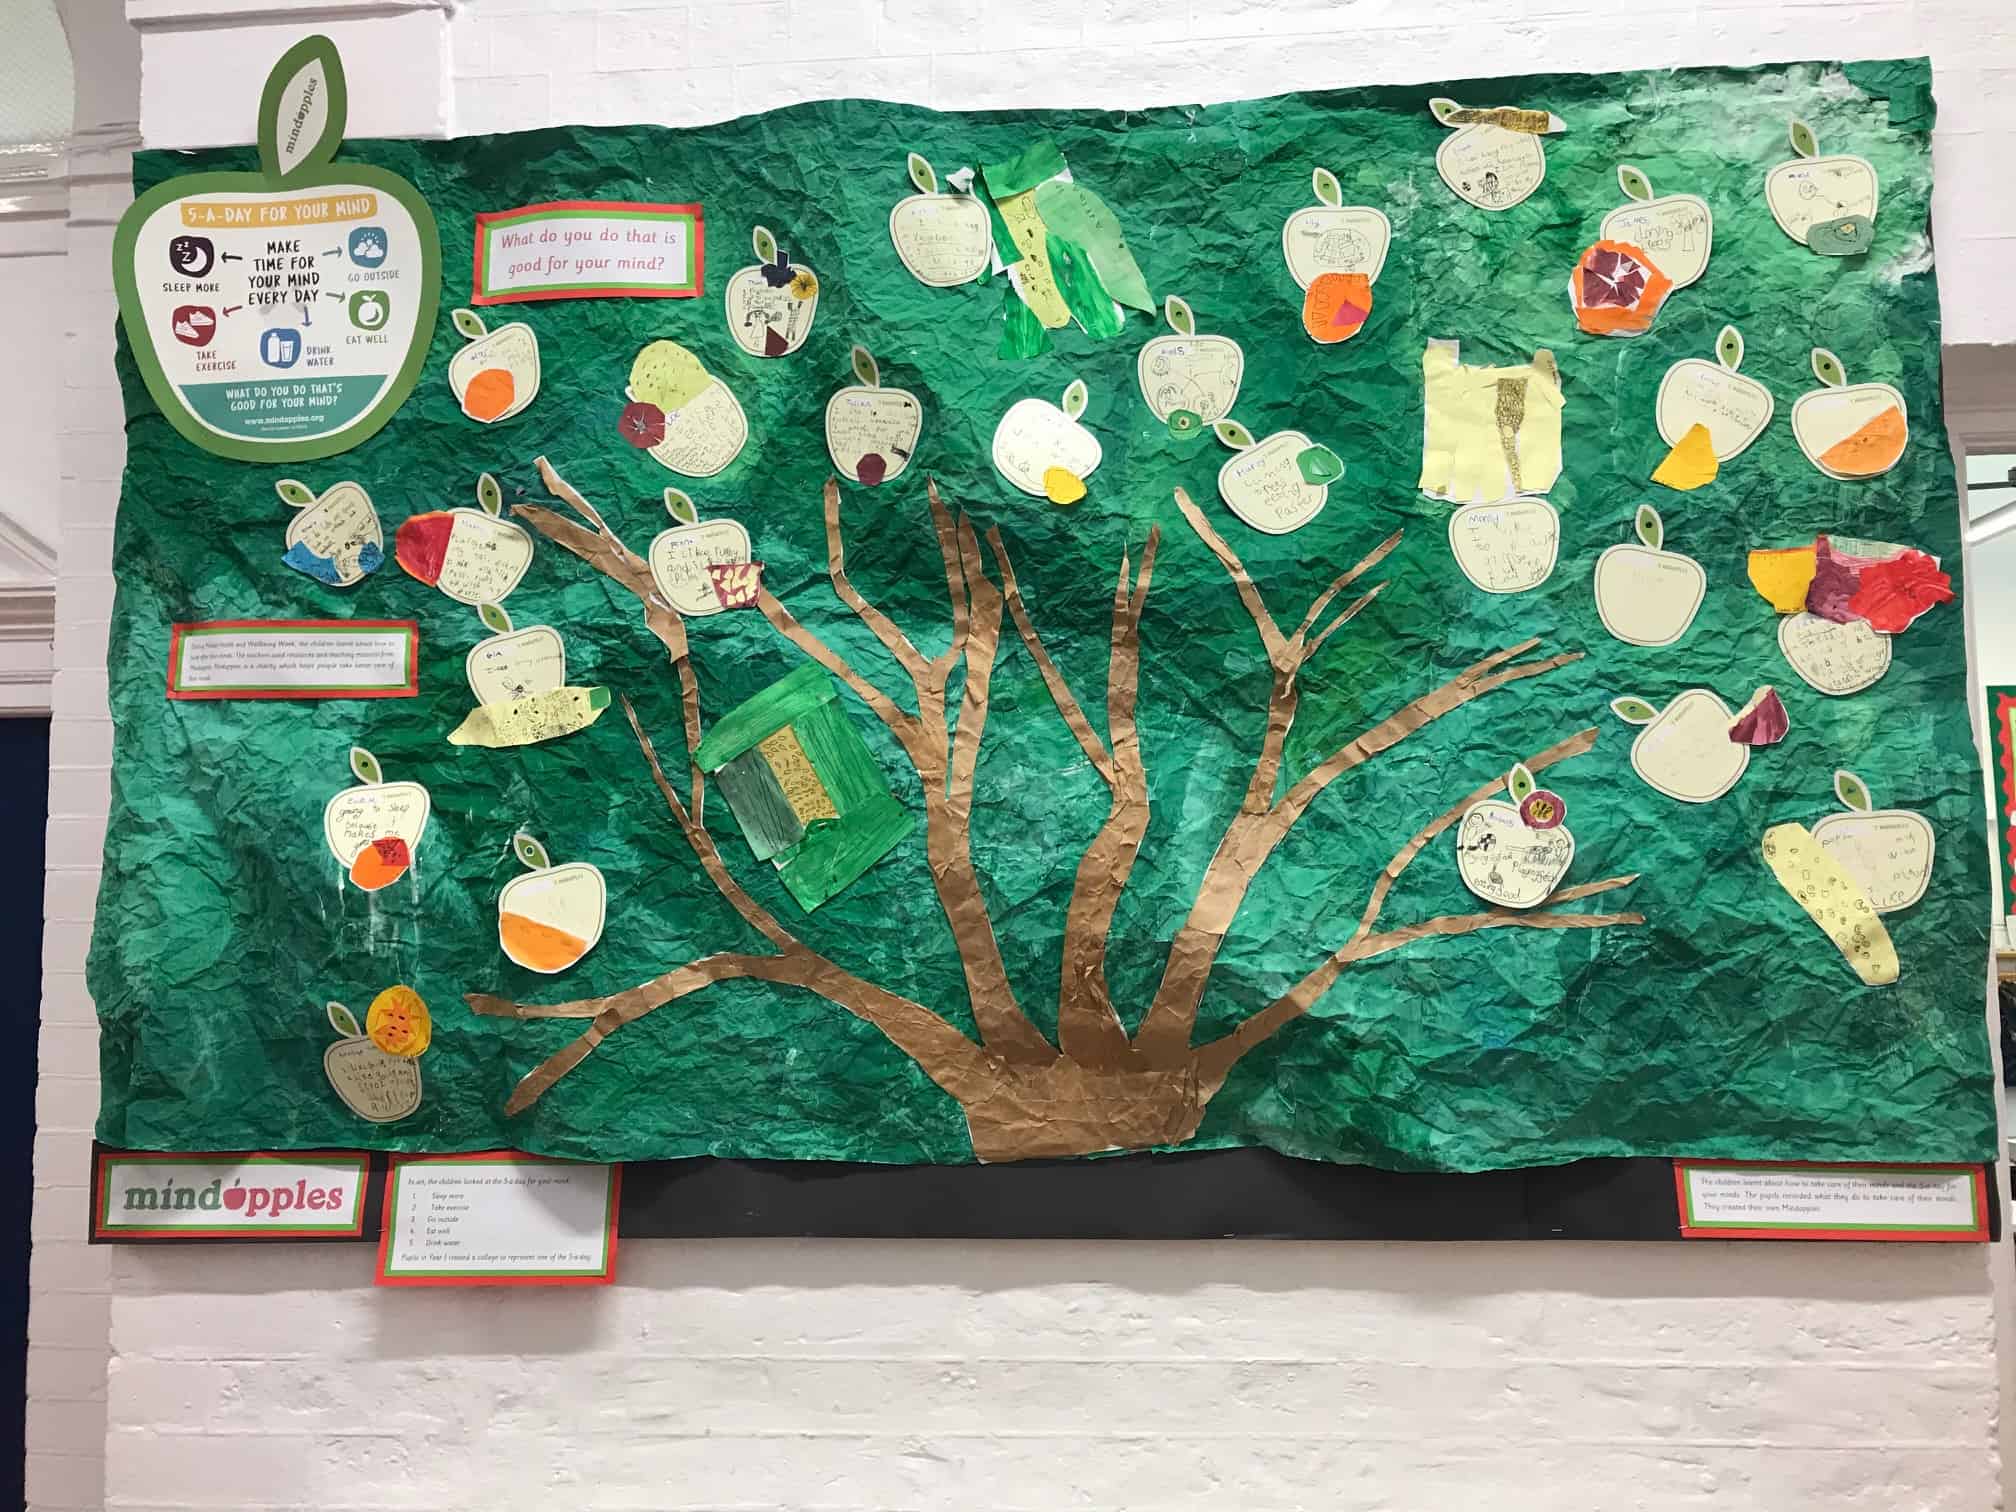 3D image of a handmade tree noticeboard from a school with a green background and brown tree and branches covered in apple shaped cards.